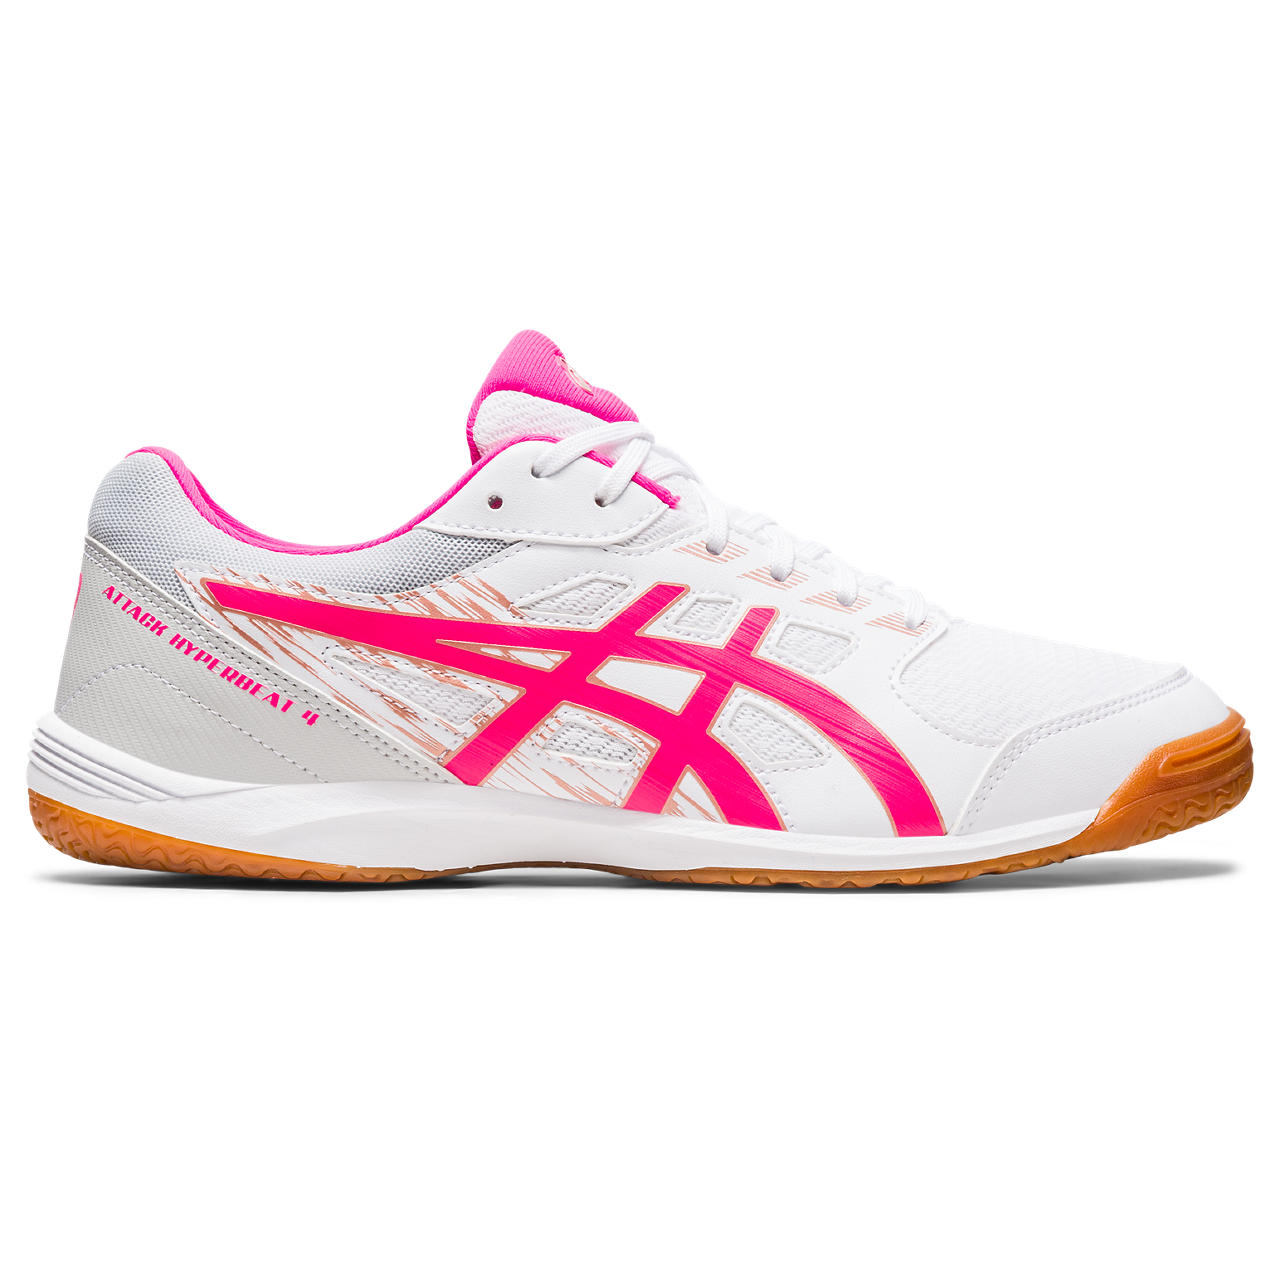 ASICS ATTACK HYPERBEAT 4, WHITE/PINK GLO, swatch